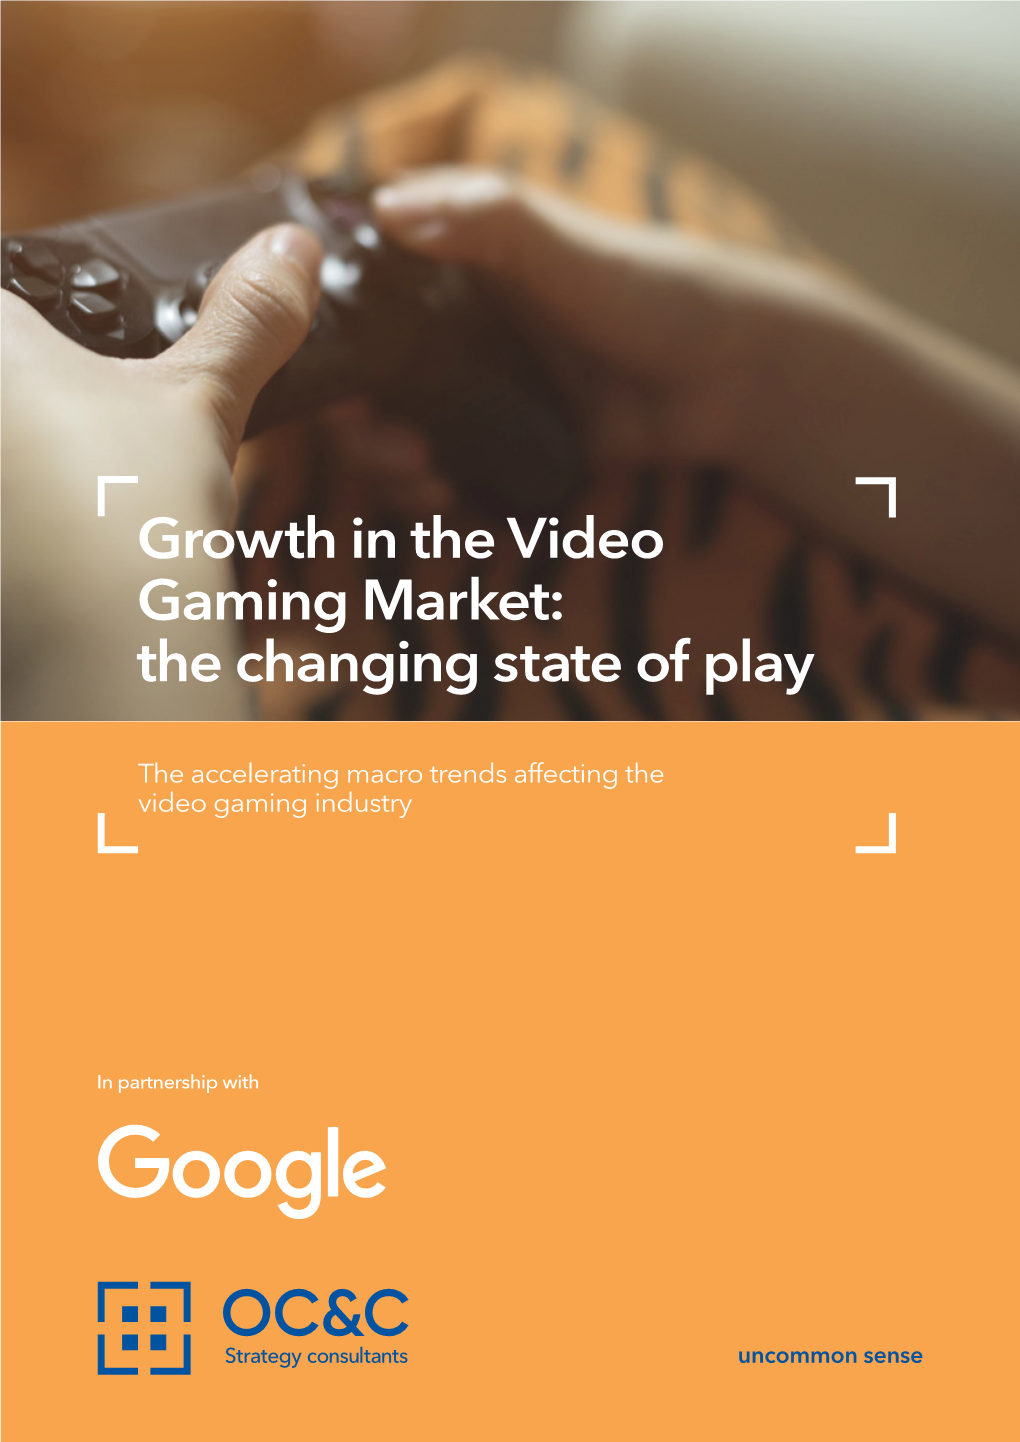 Growth in the Video Gaming Market: the Changing State of Play